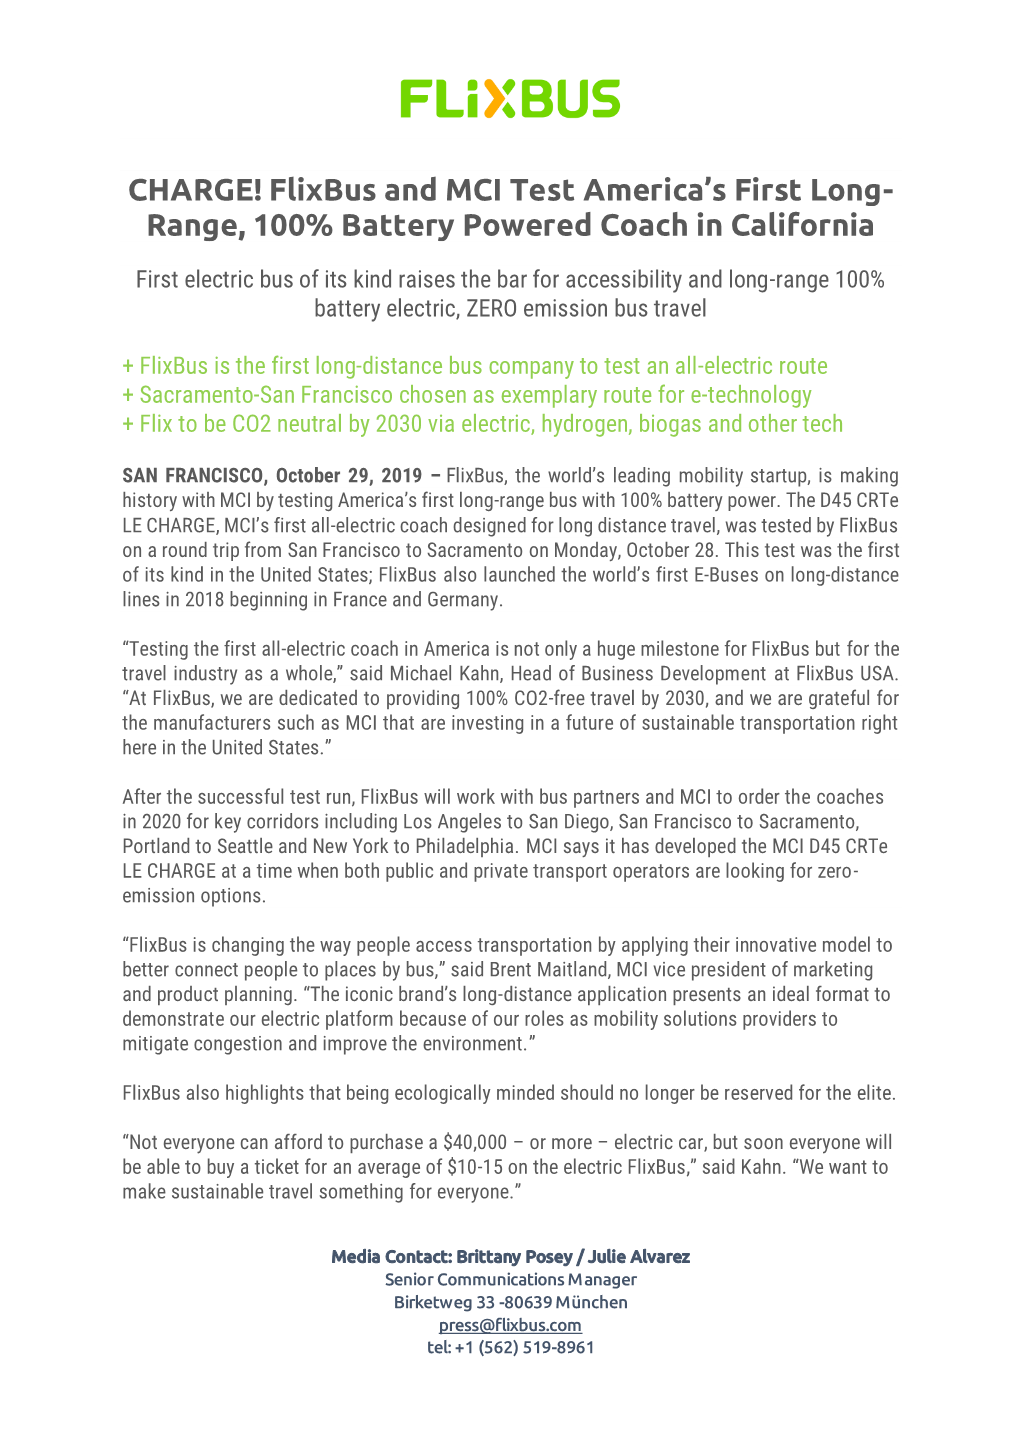 CHARGE! Flixbus and MCI Test America's First Long- Range, 100% Battery Powered Coach in California